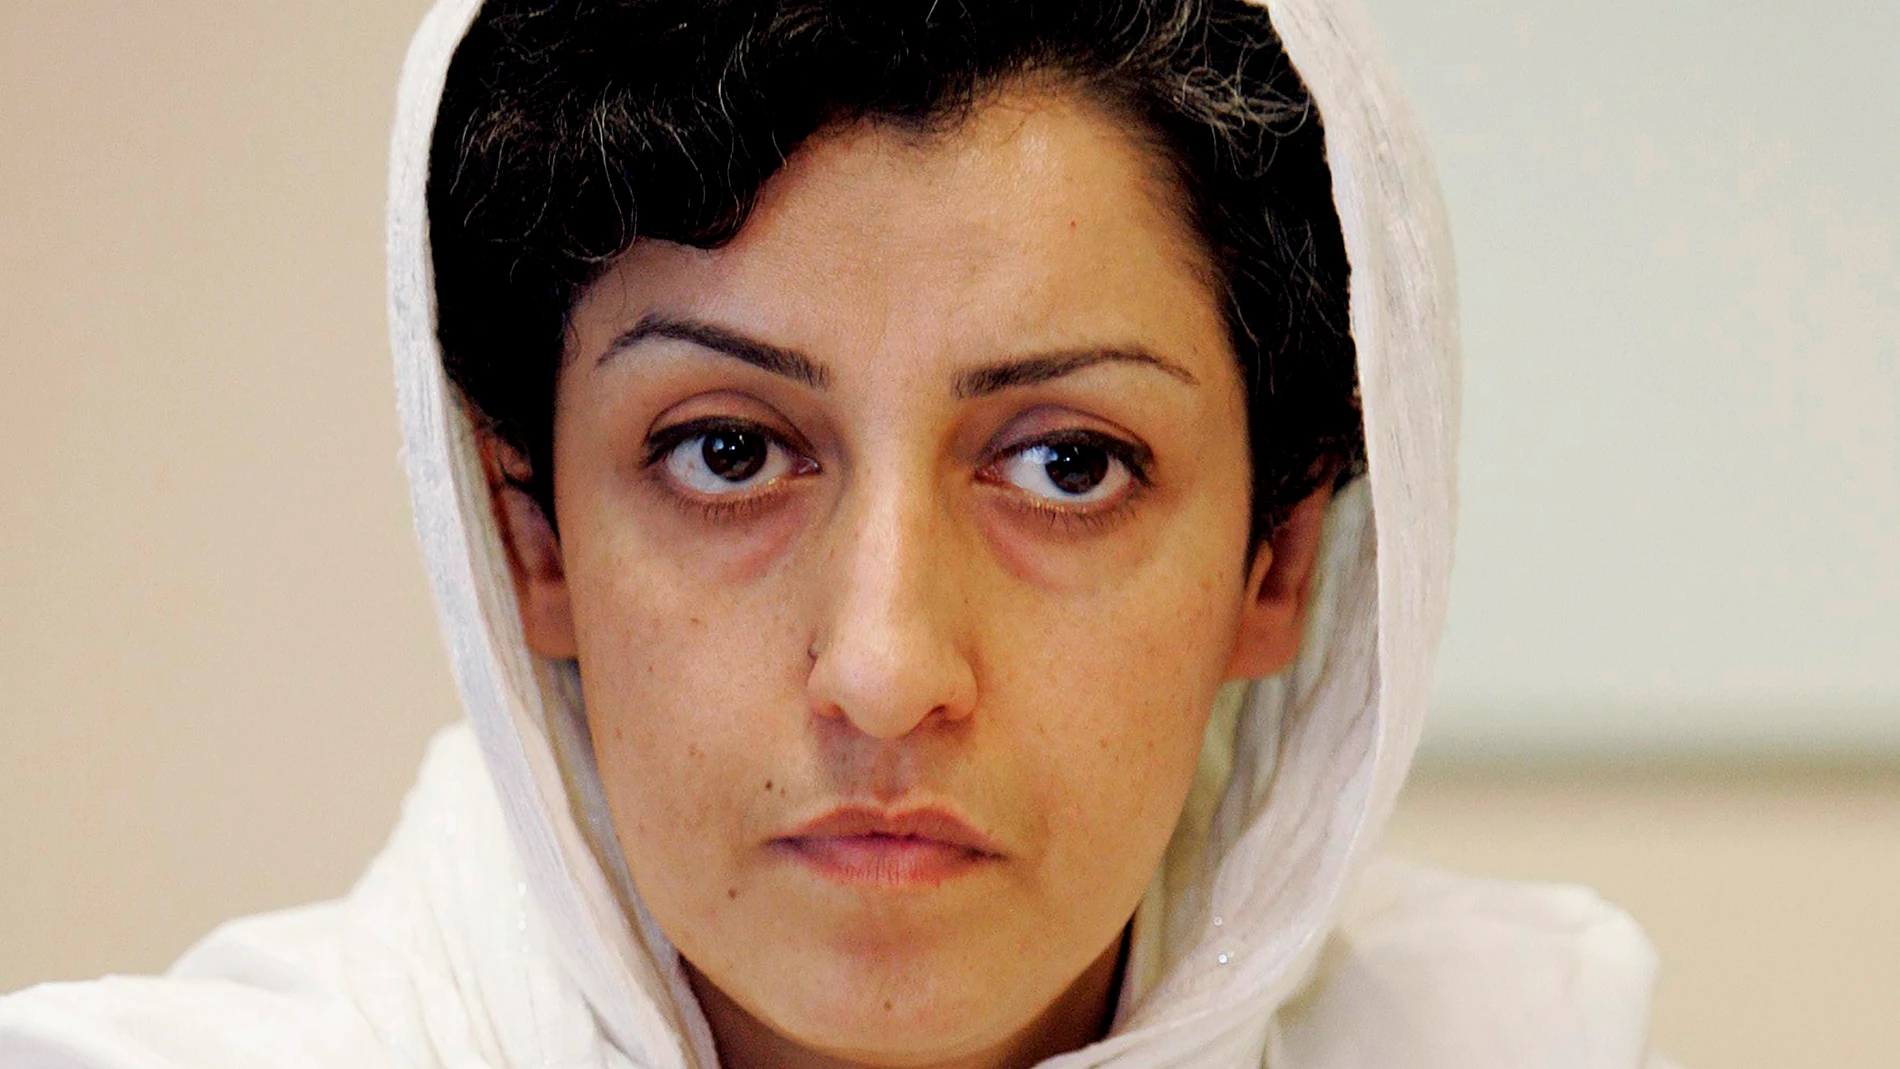 FILE - Iranian Narges Mohammadi, delegate of the Center for Human Rights Defenders, listens to a question during a press conference on the Assessment of the Human Rights Situation in Iran, at the U.N. headquarters in Geneva, Switzerland, on June 9, 2008. The Nobel Peace Prize has been awarded to Narges Mohammadi for fighting oppression of women in Iran. The chair of the Norwegian Nobel Committee announced the prize Friday, Oct. 6, 2023 in Oslo. (Magali Girardin/Keystone via AP, File)